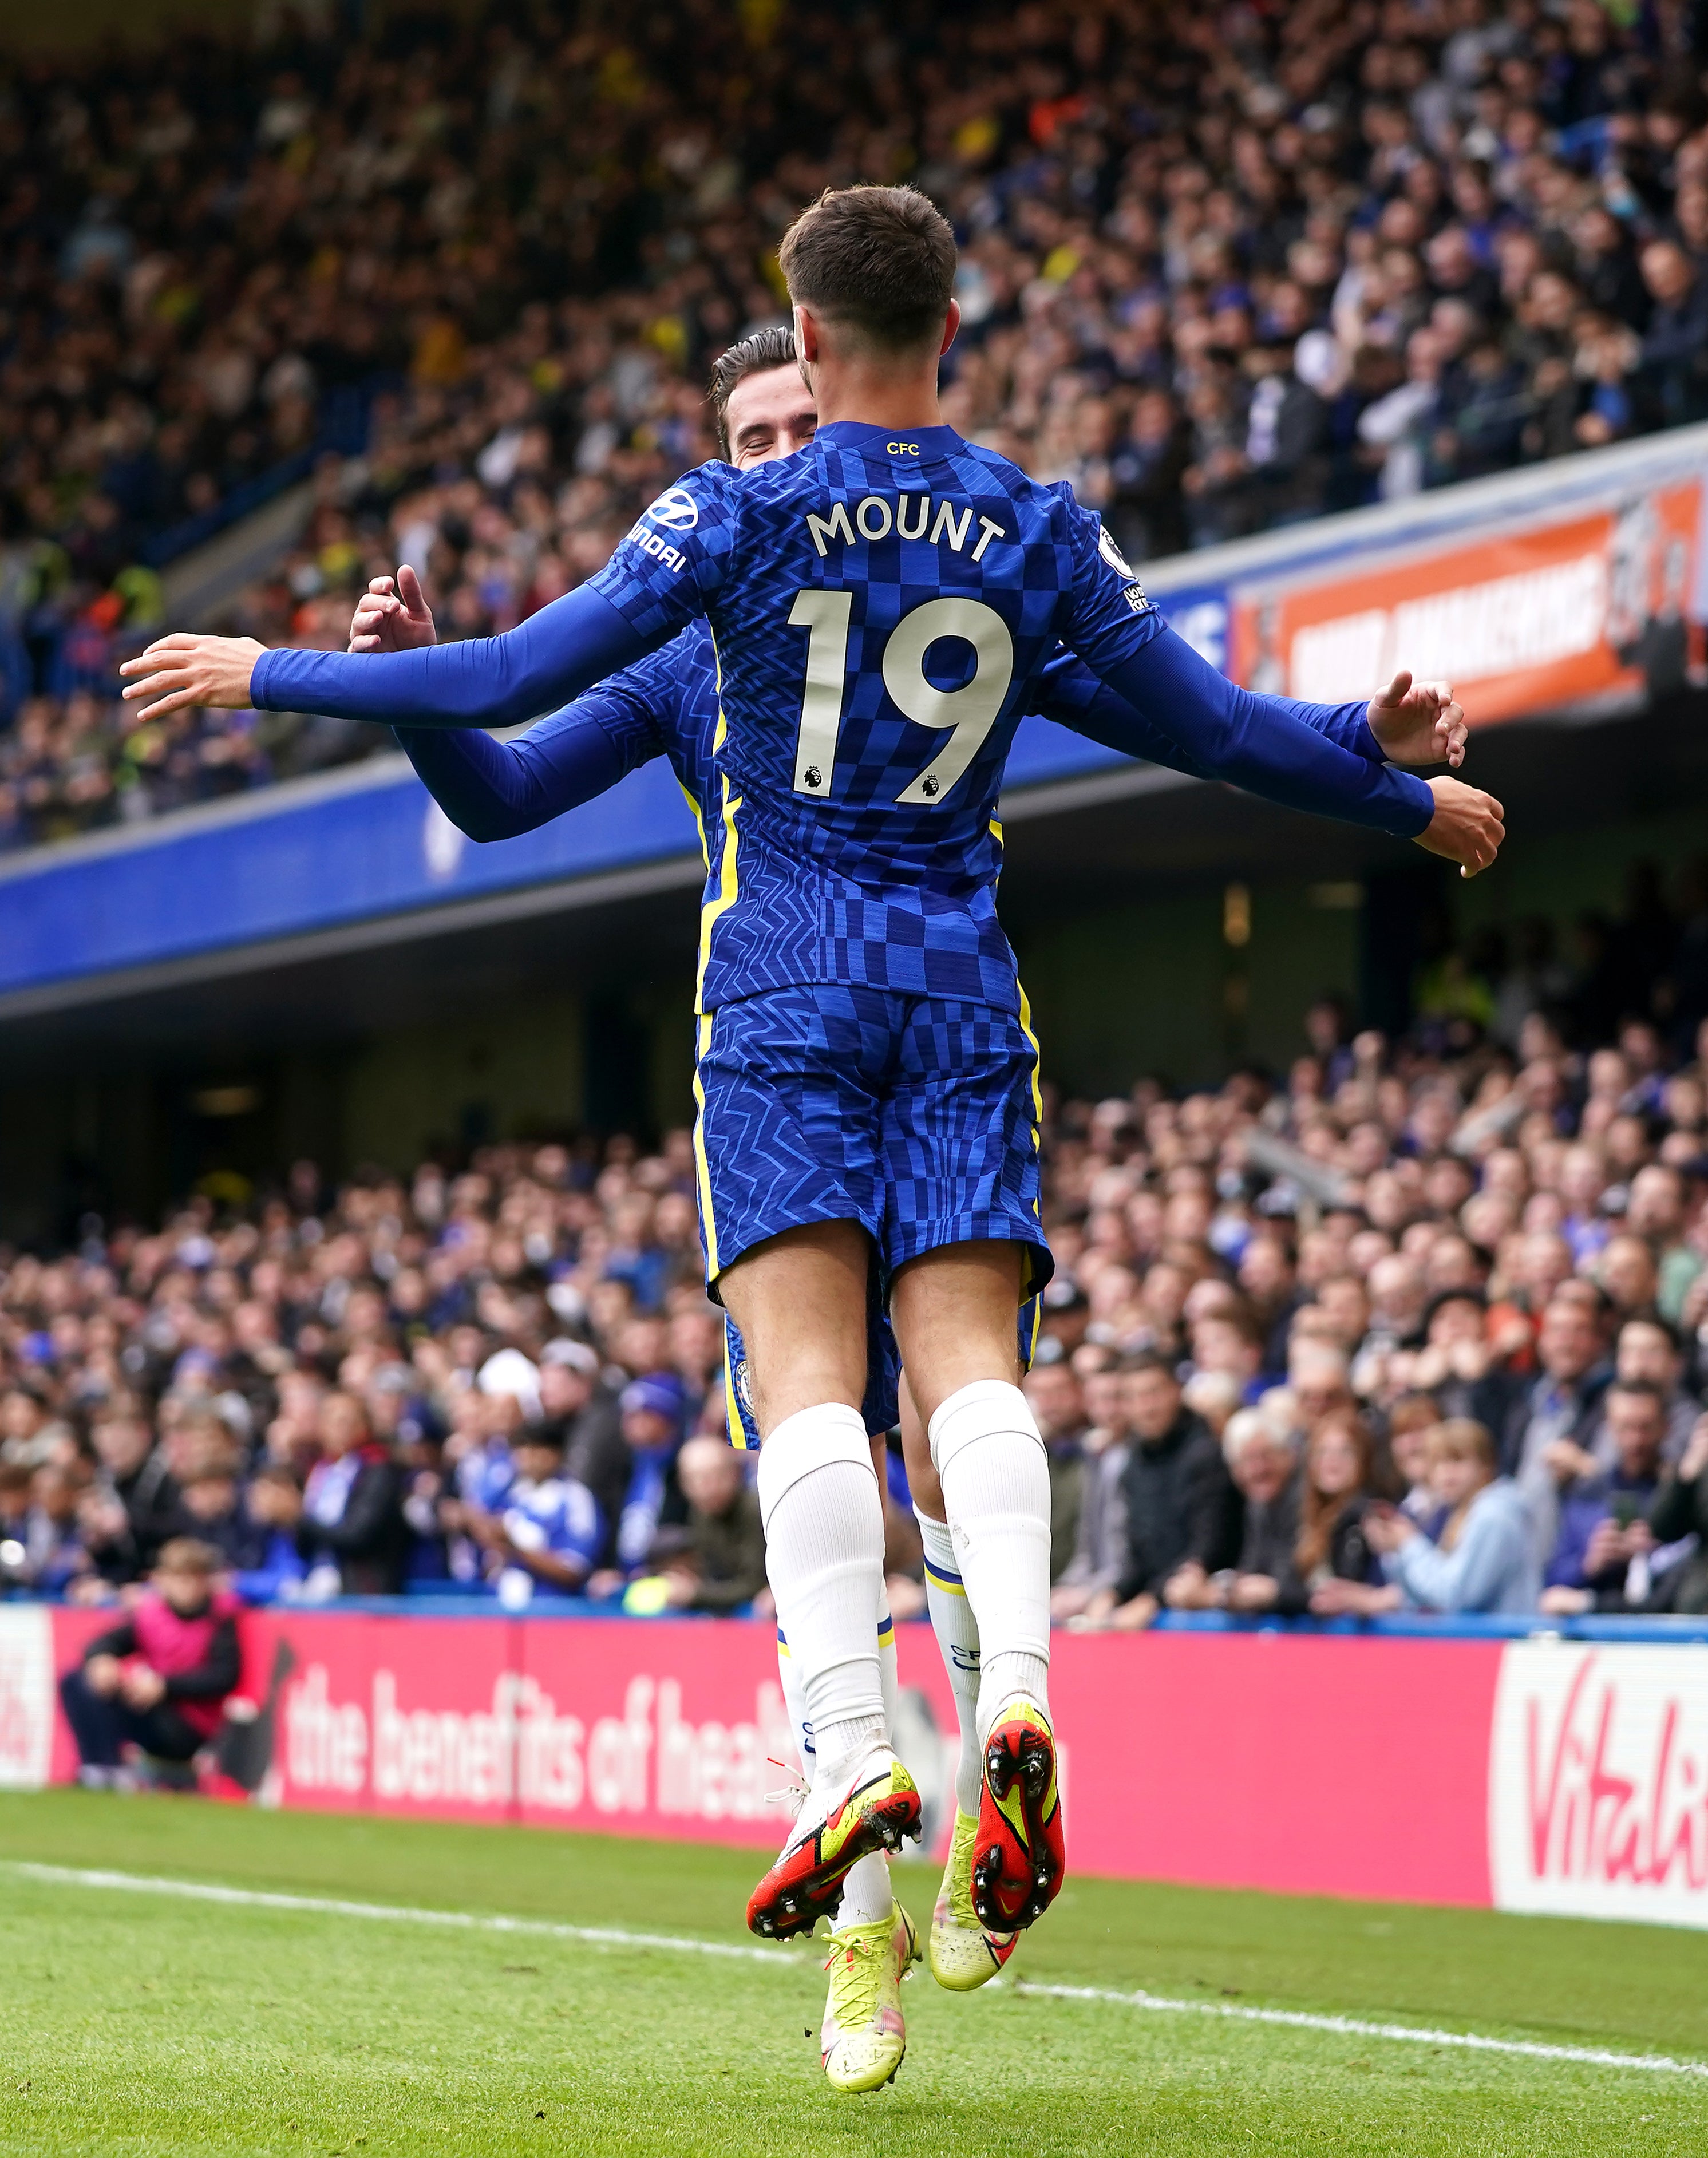 Chelsea’s Mason Mount celebrates scoring his side’s first goal in the 7-0 win over Norwich (Tess Derry/PA)